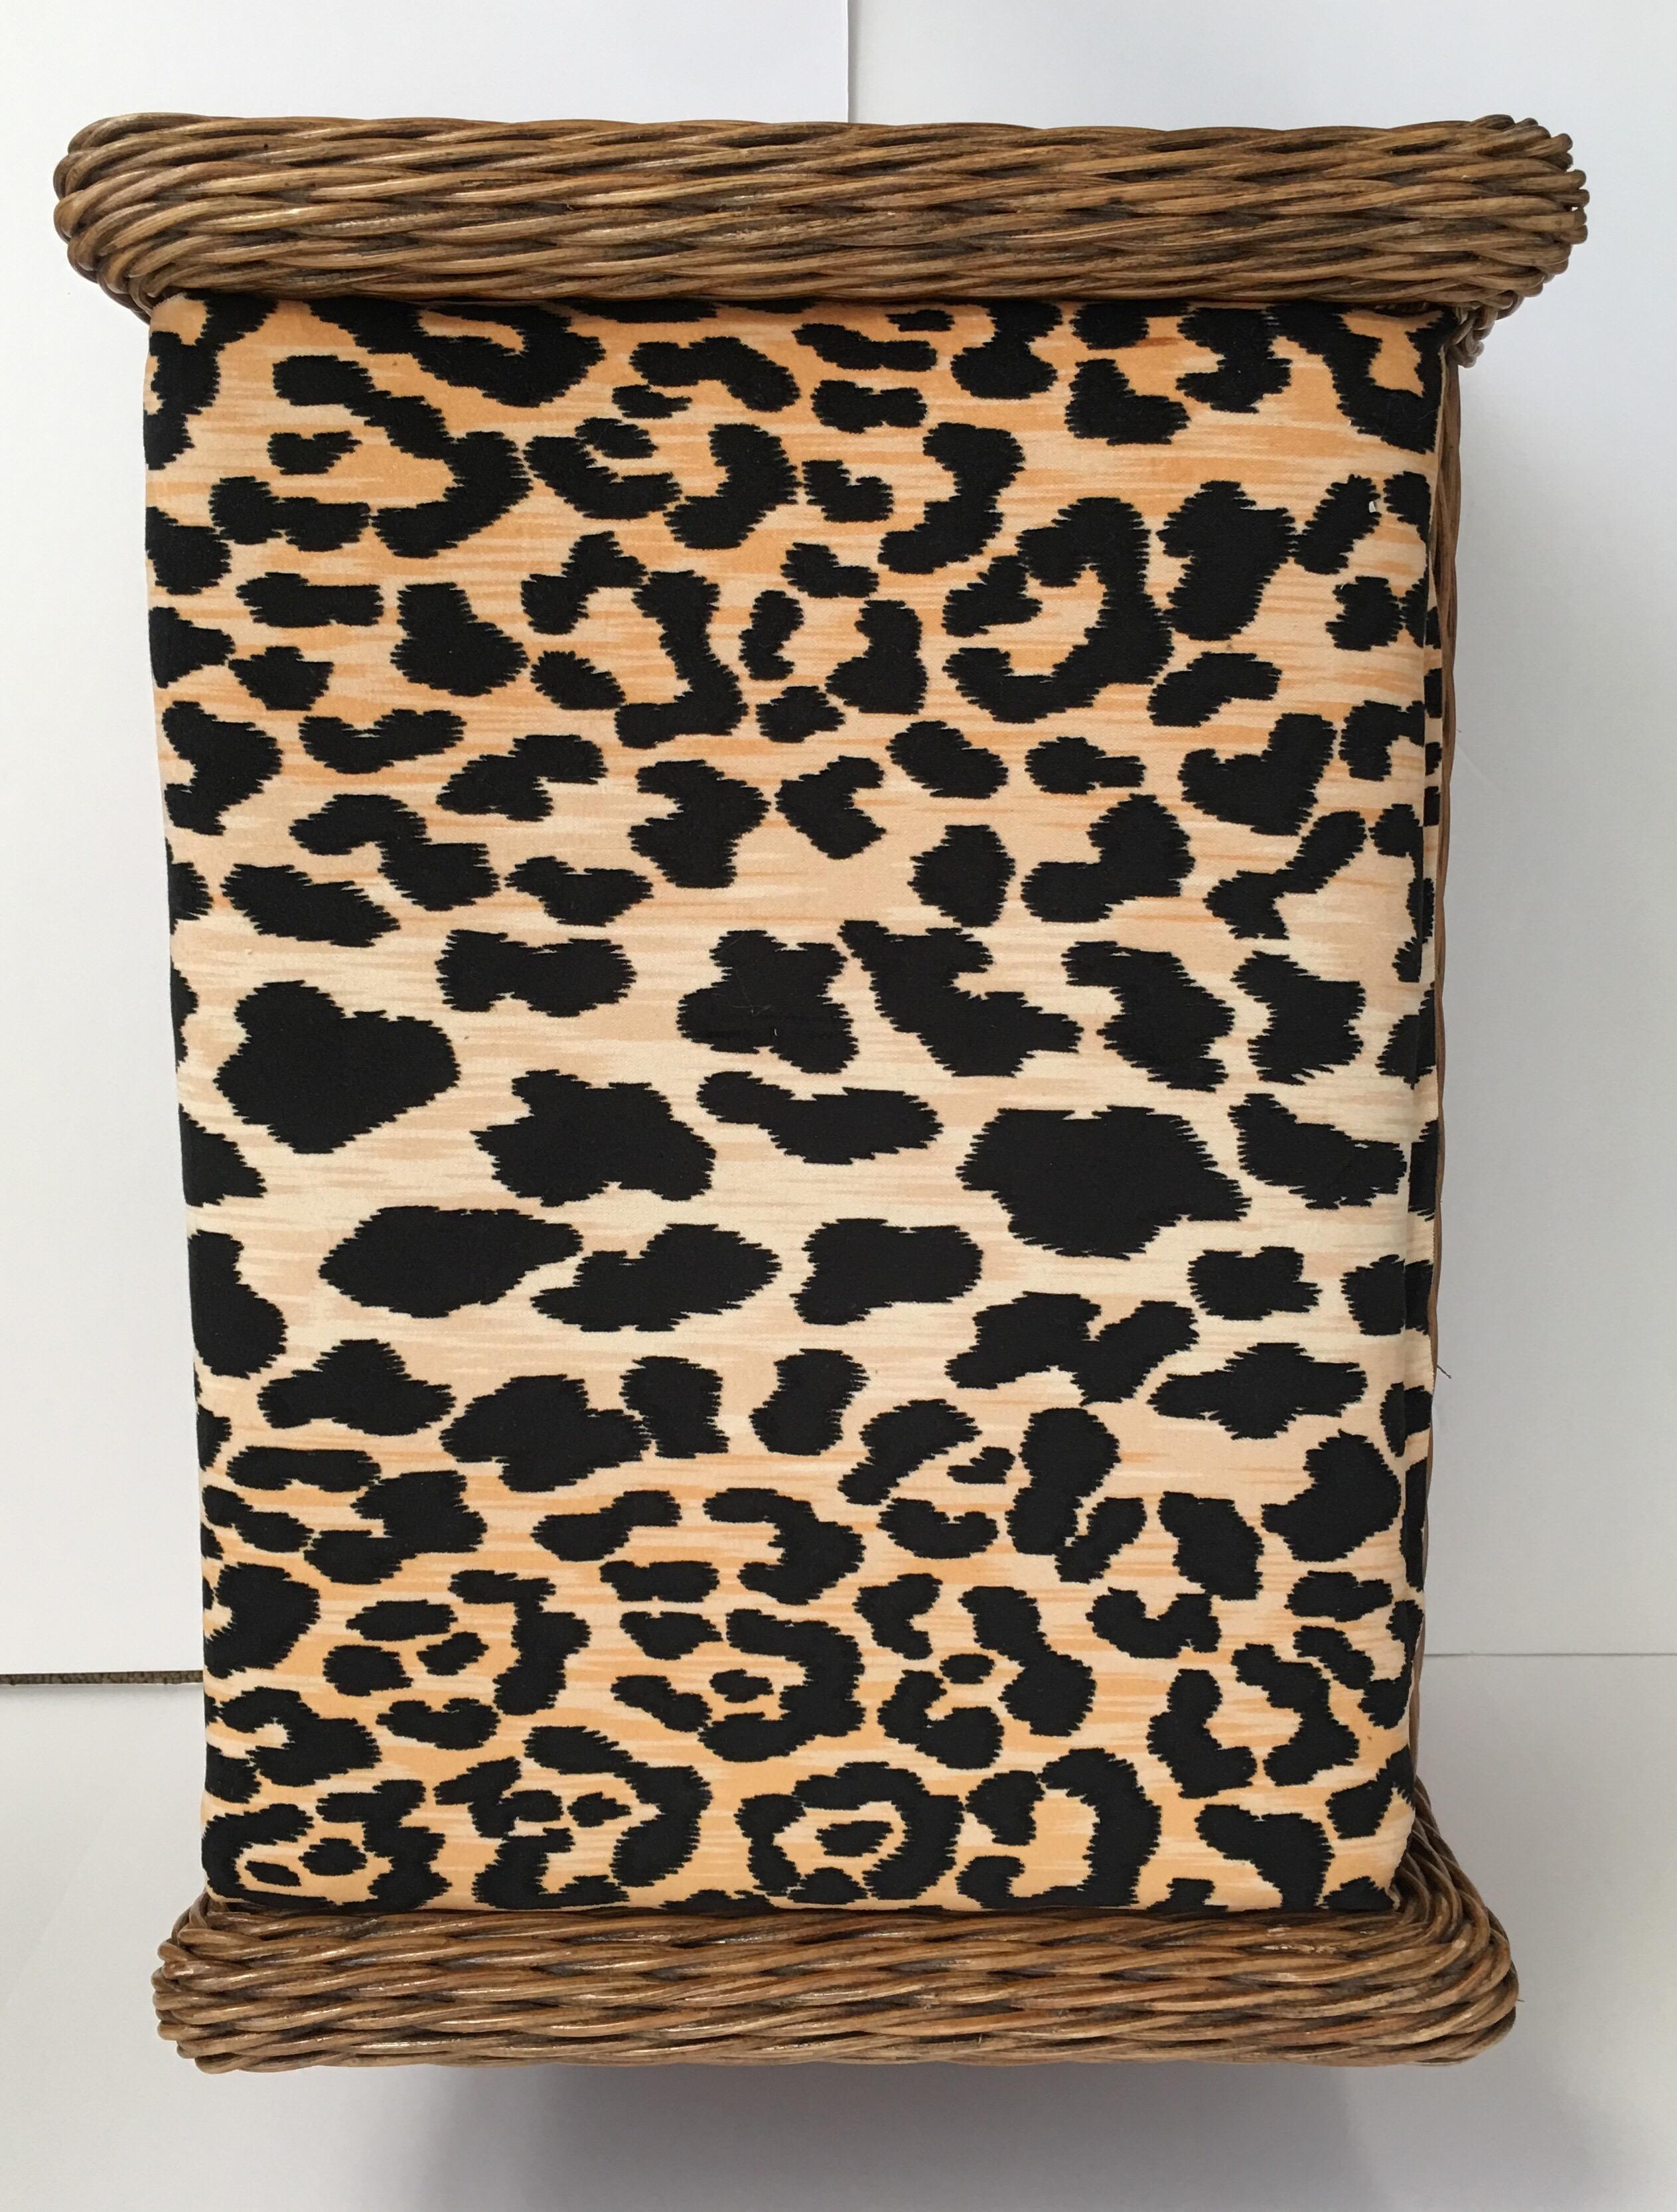 20th Century Sculptural Draped Wicker Bench with Animal Print Cushion